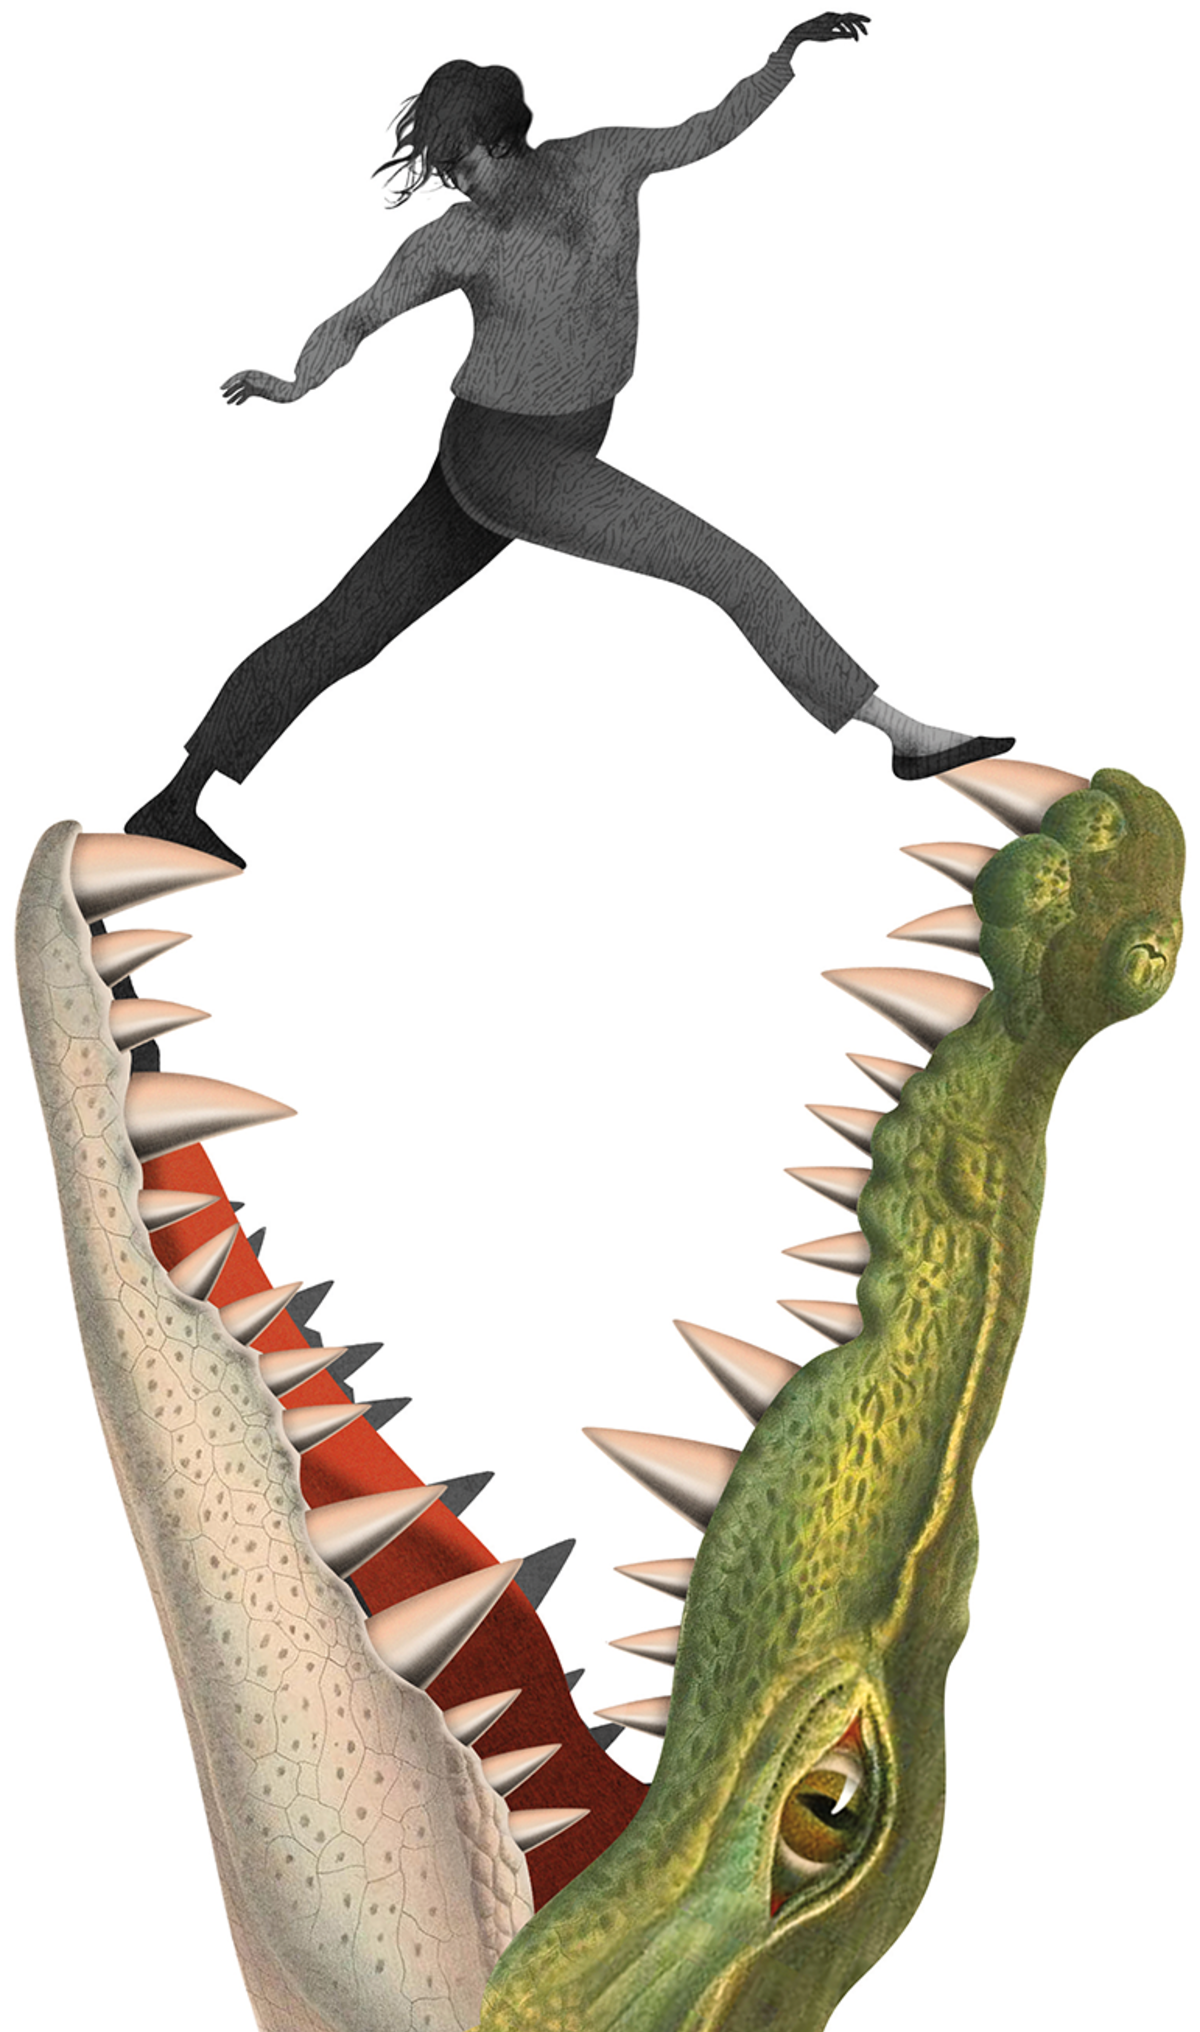 Illustration of a person trying to escape from being eaten by an alligator